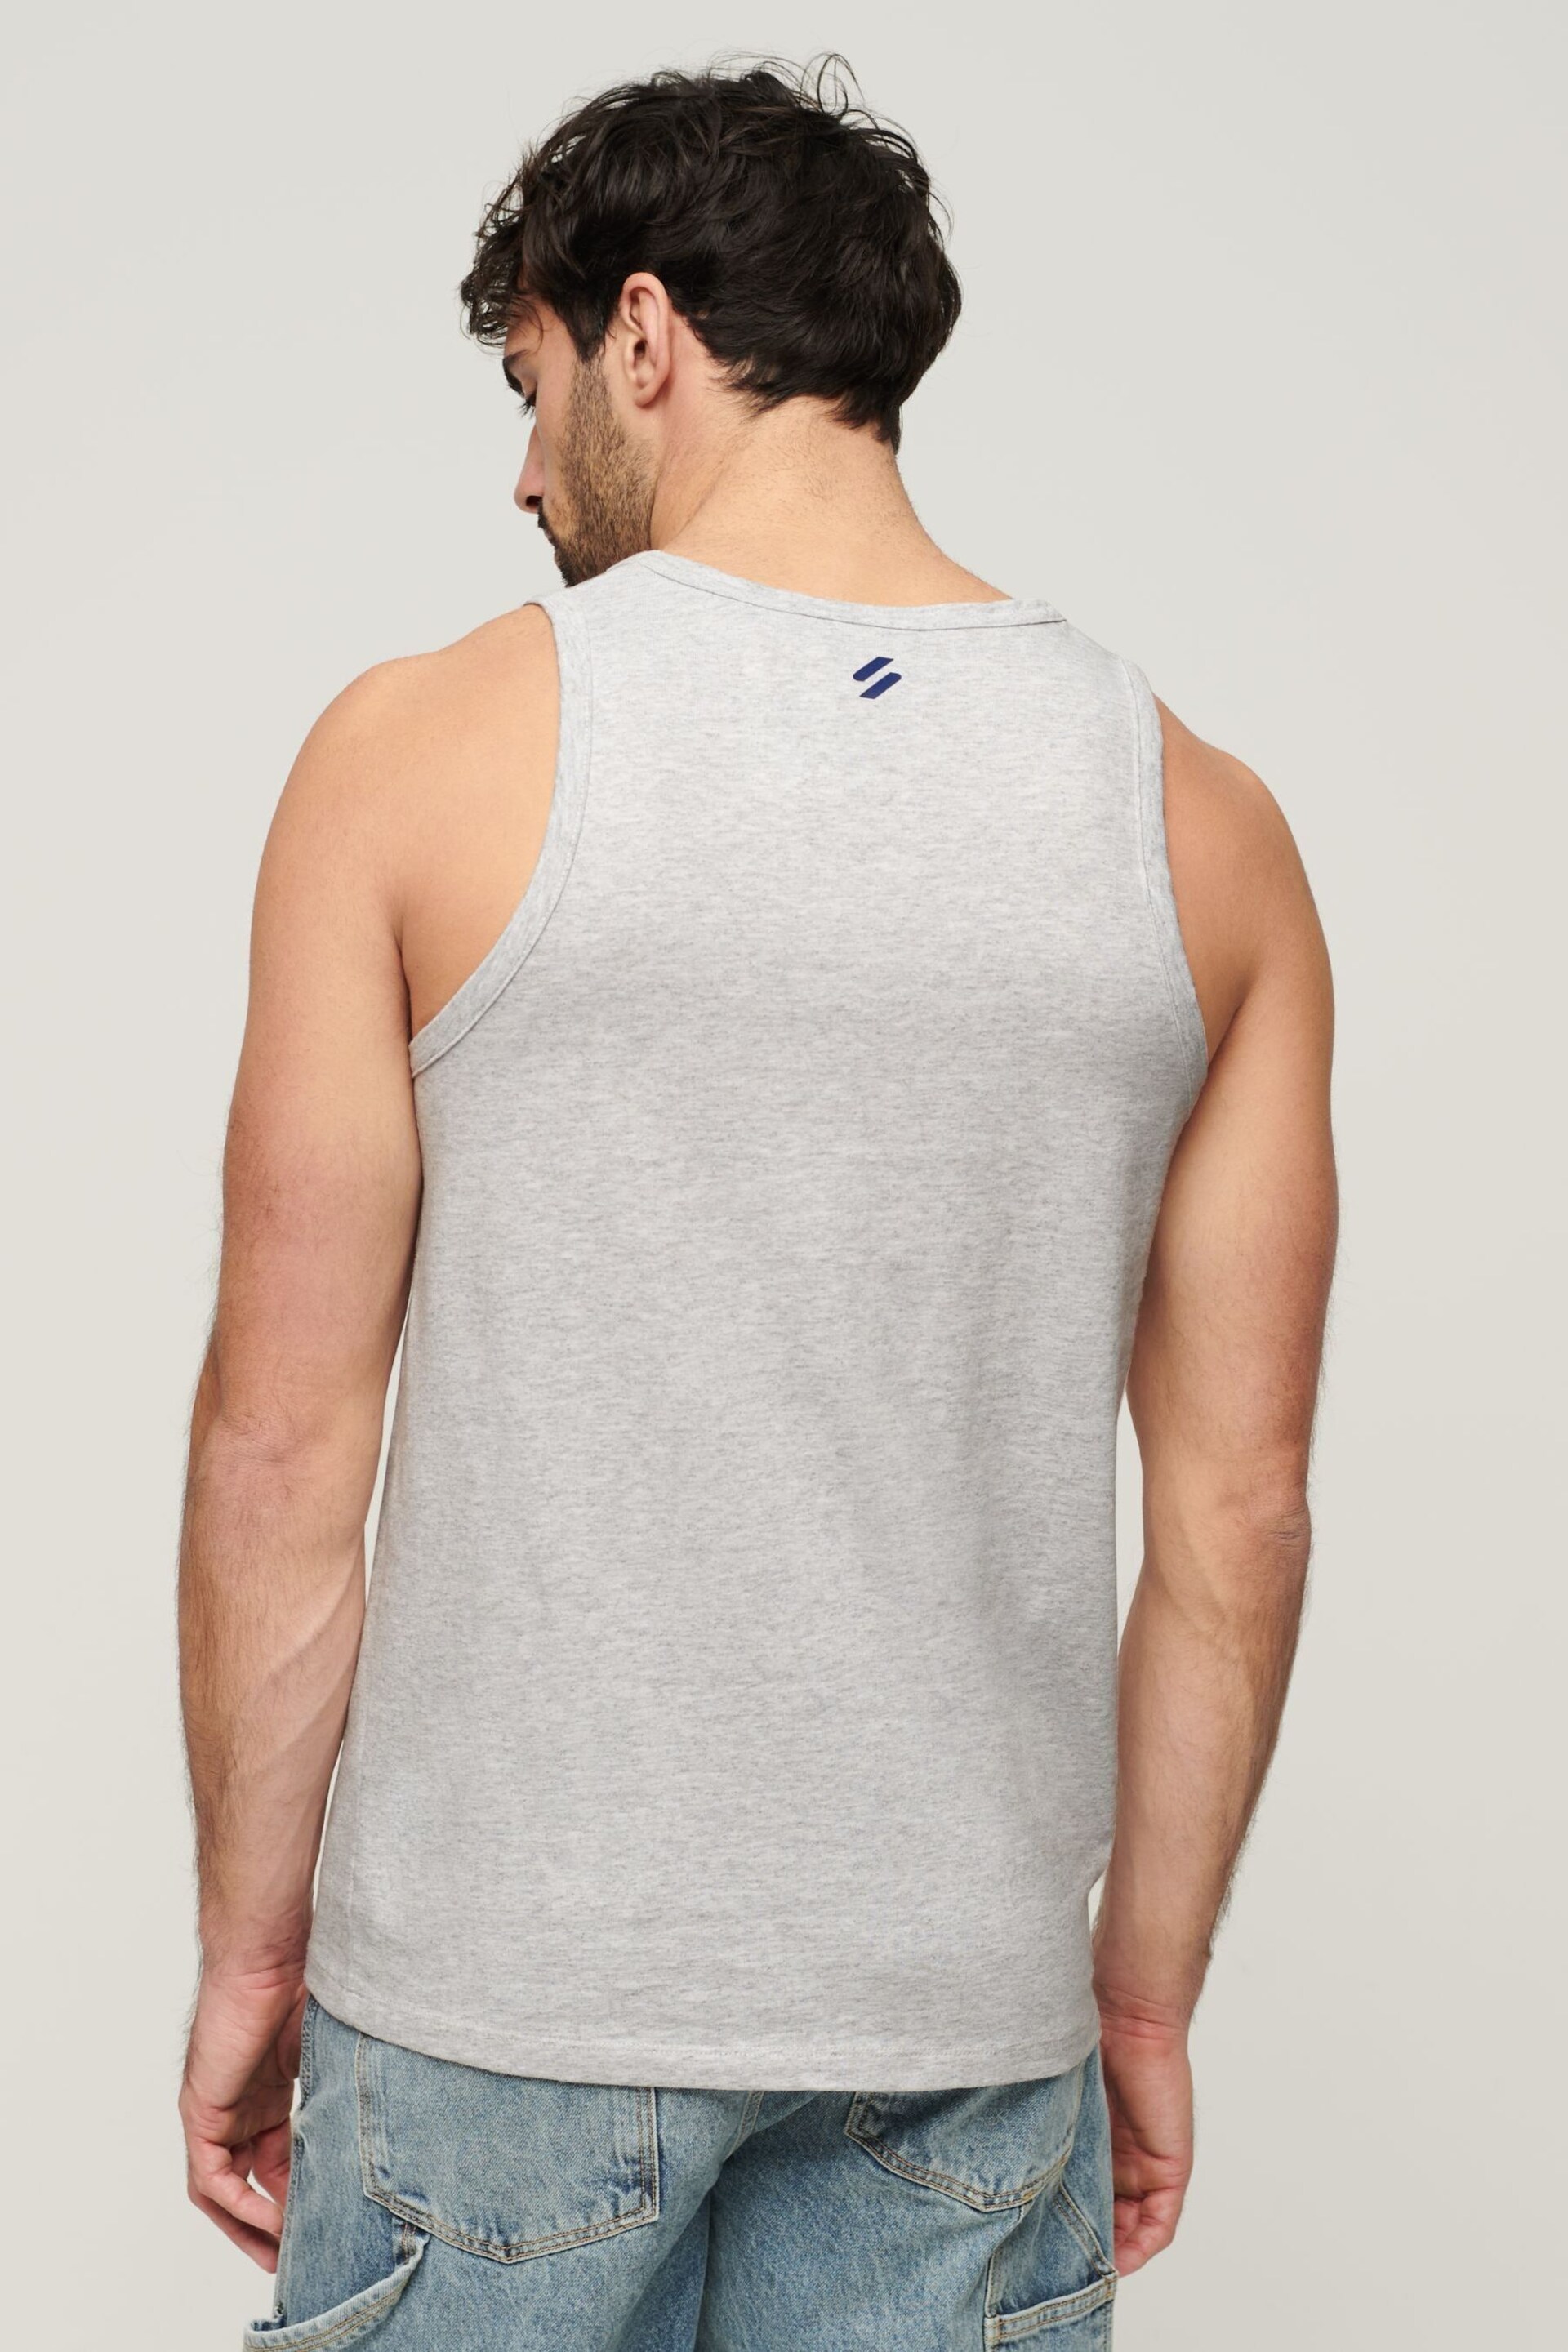 Superdry Grey Sportswear Logo Relaxed Vest - Image 2 of 4